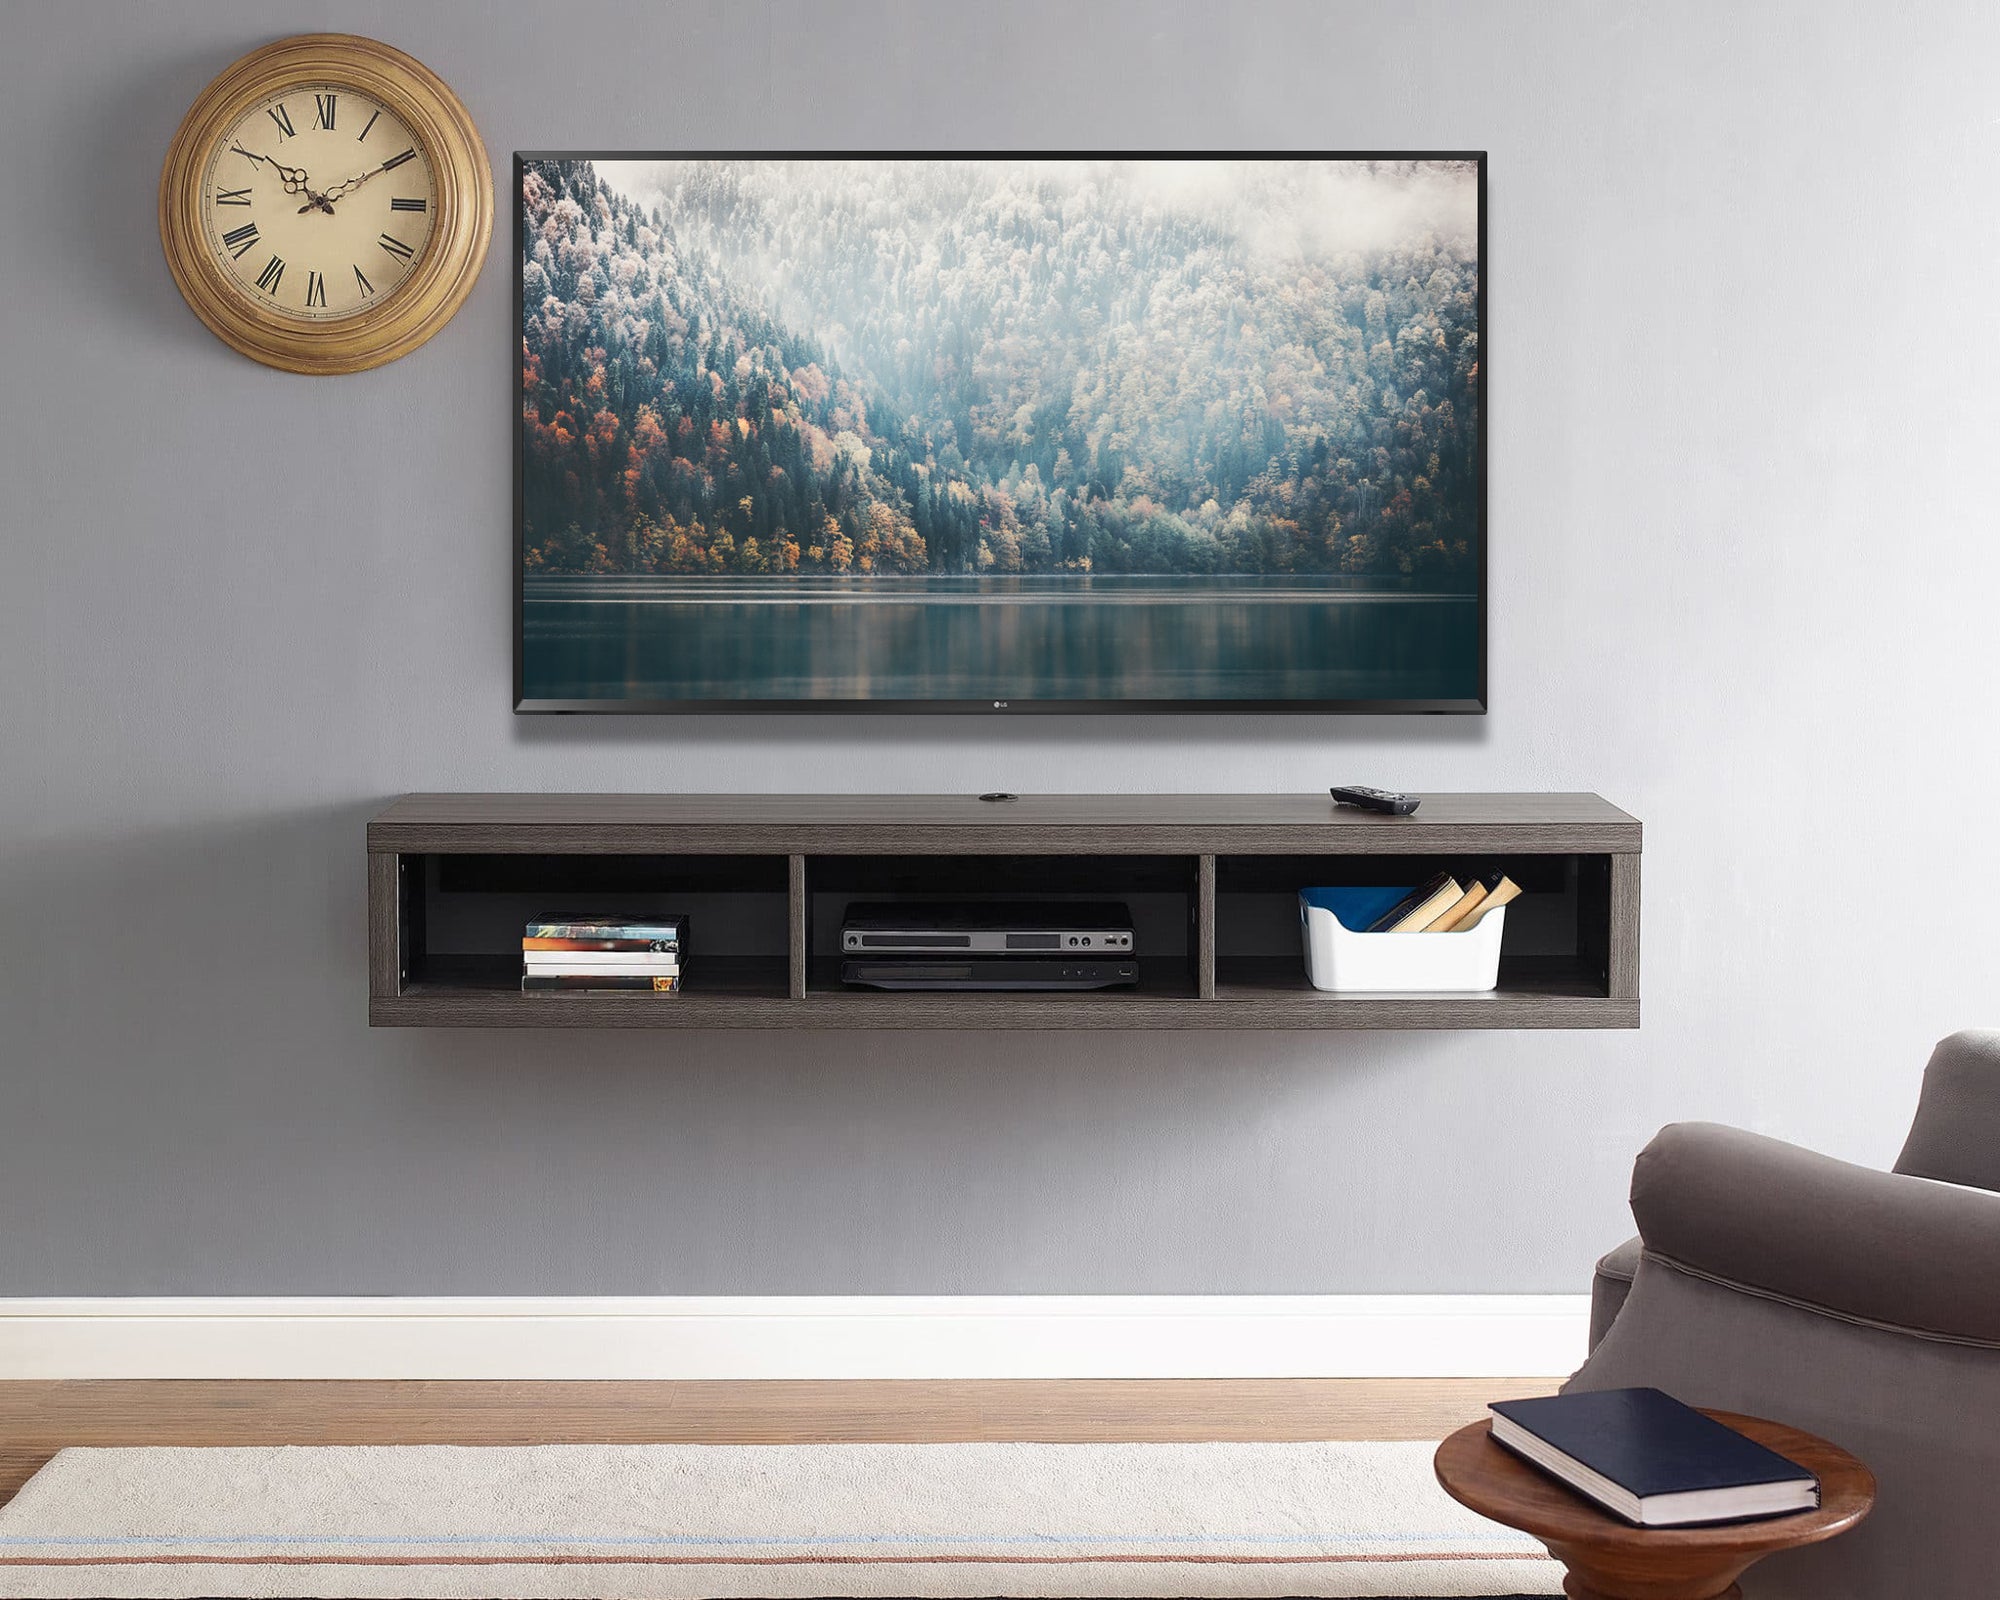 Floating Wall Mount TV Stand - Newport - Skyline Gray